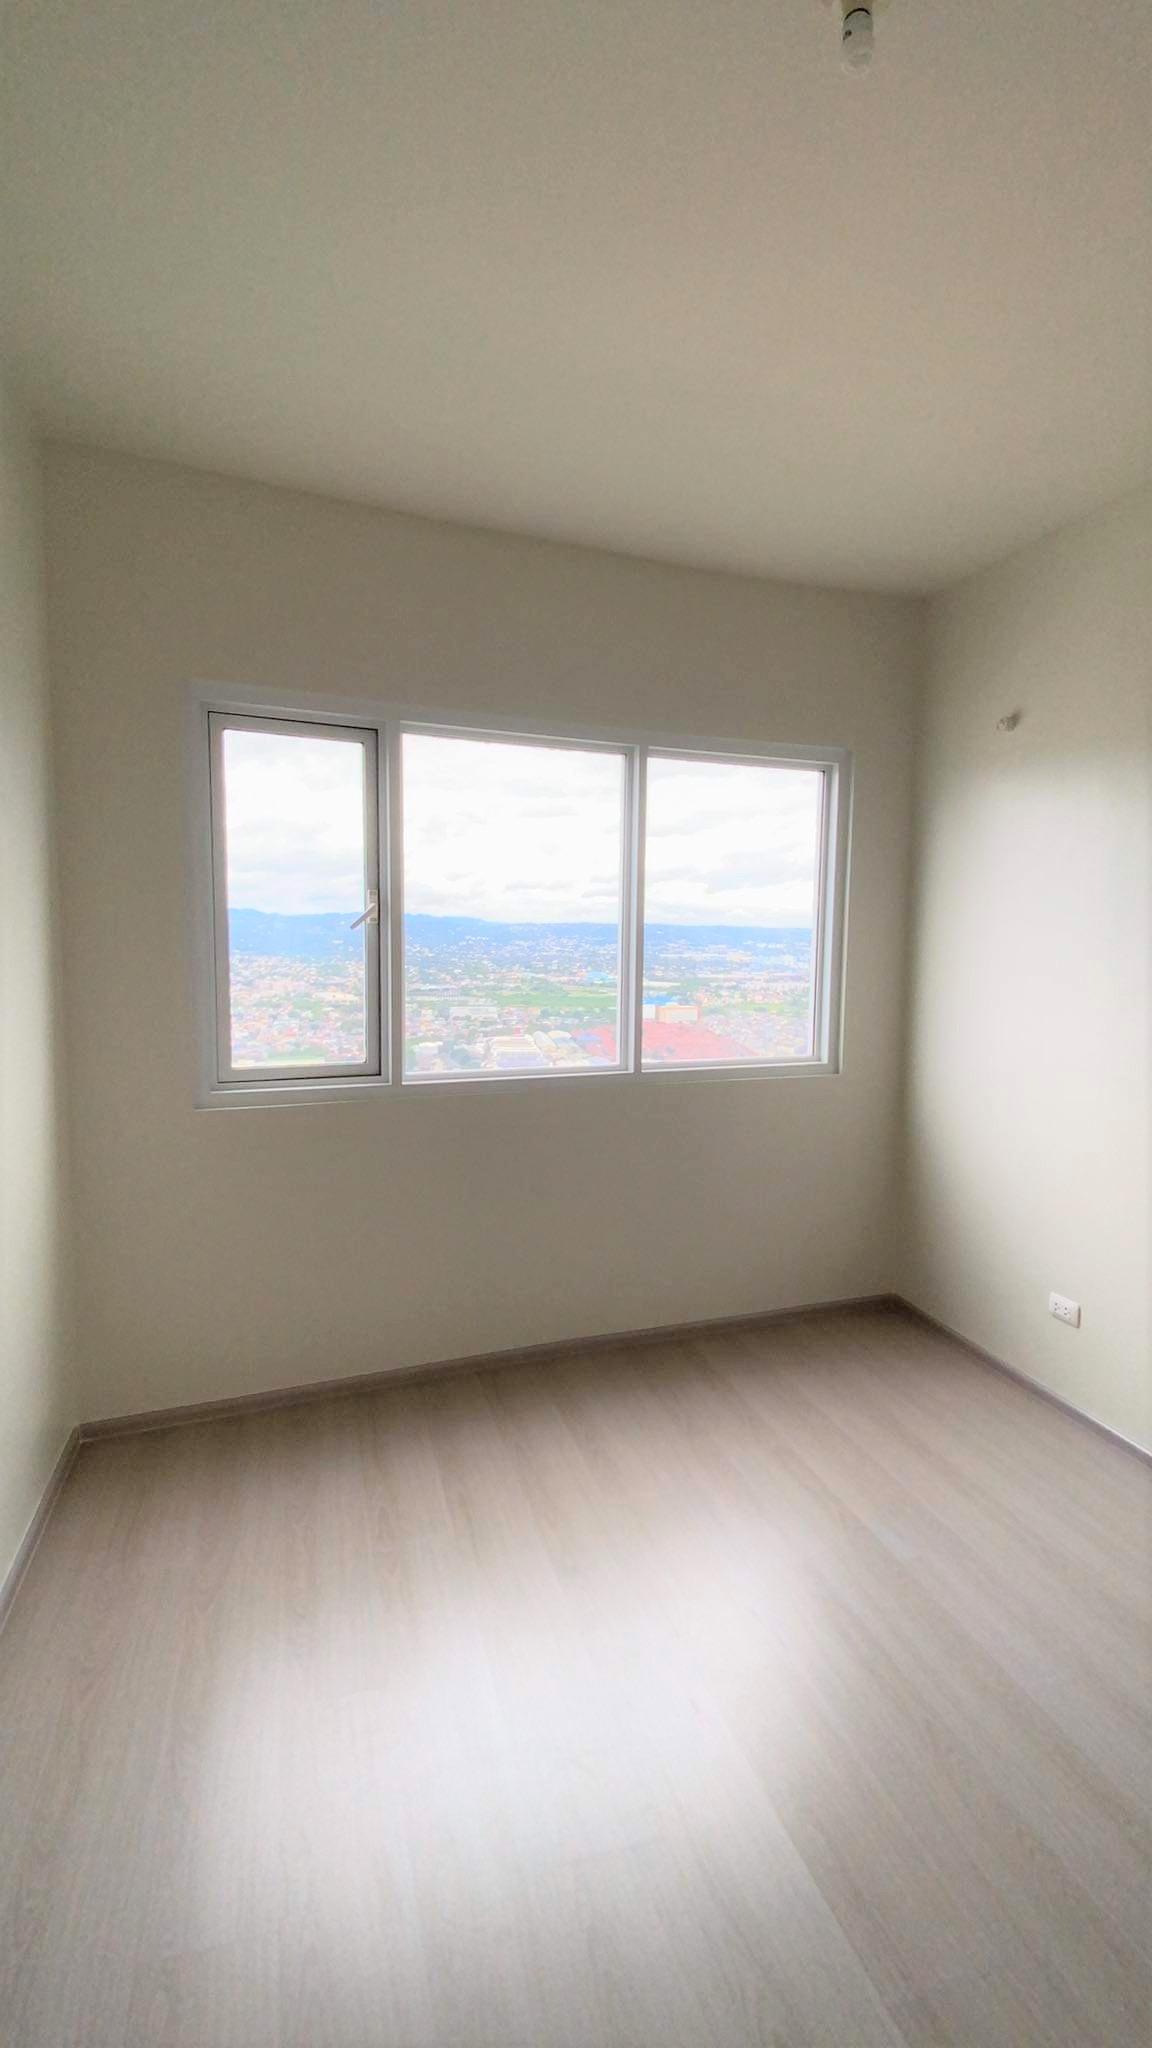 1BR Unit For Rent in Avila South Tower at Circulo Verde, Quezon City